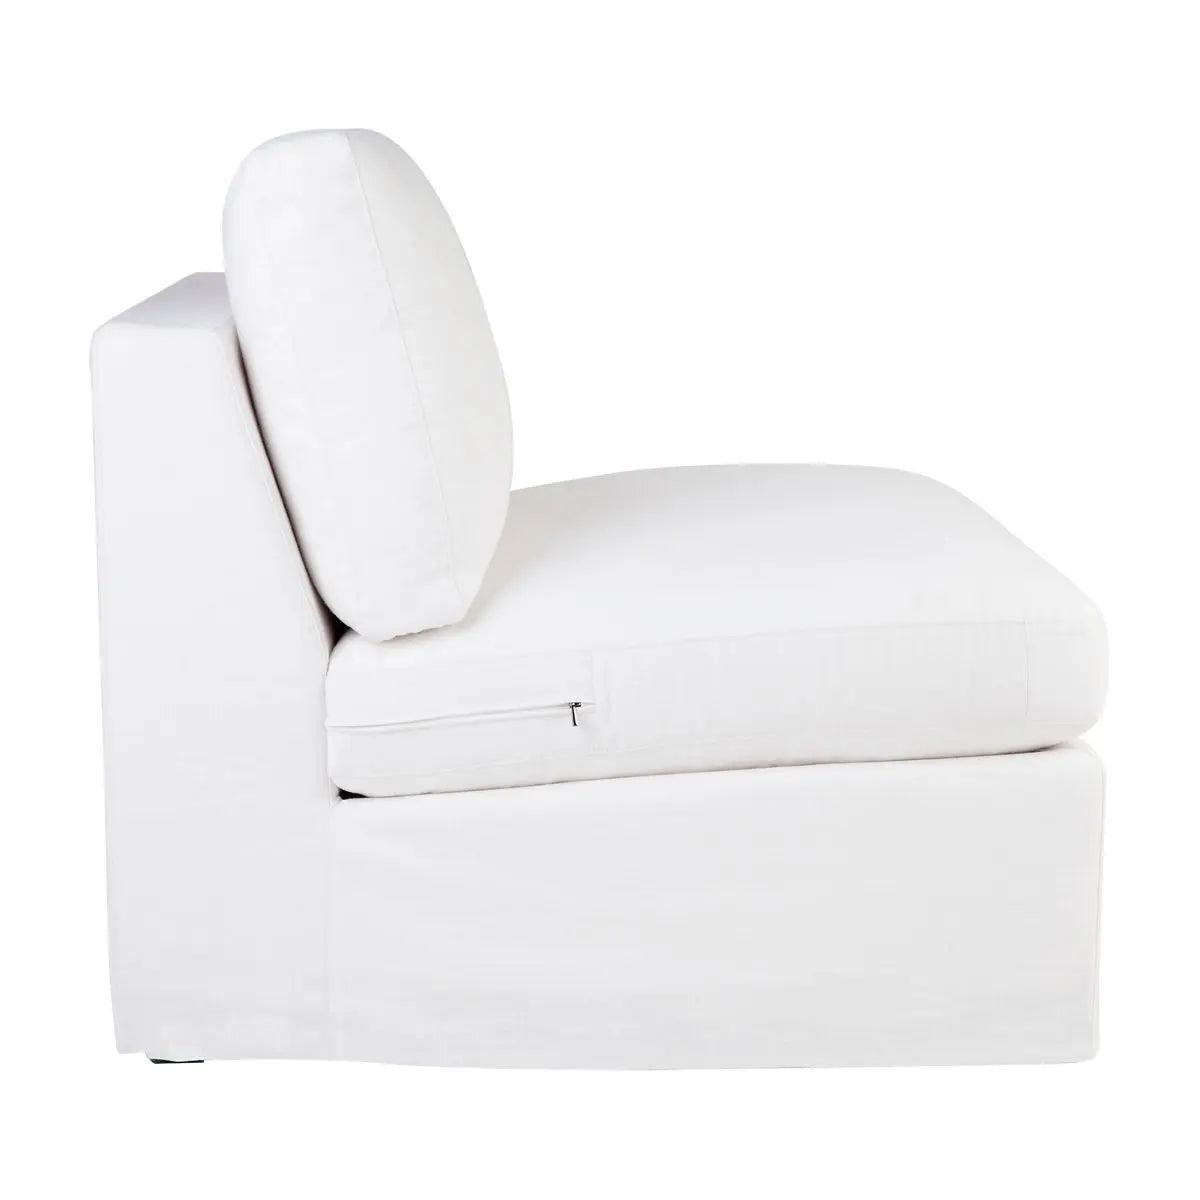 Cafe Lighting & Living Birkshire Slip Cover Occasional Chair - White Linen - Occasional Chair324569320294120910 3